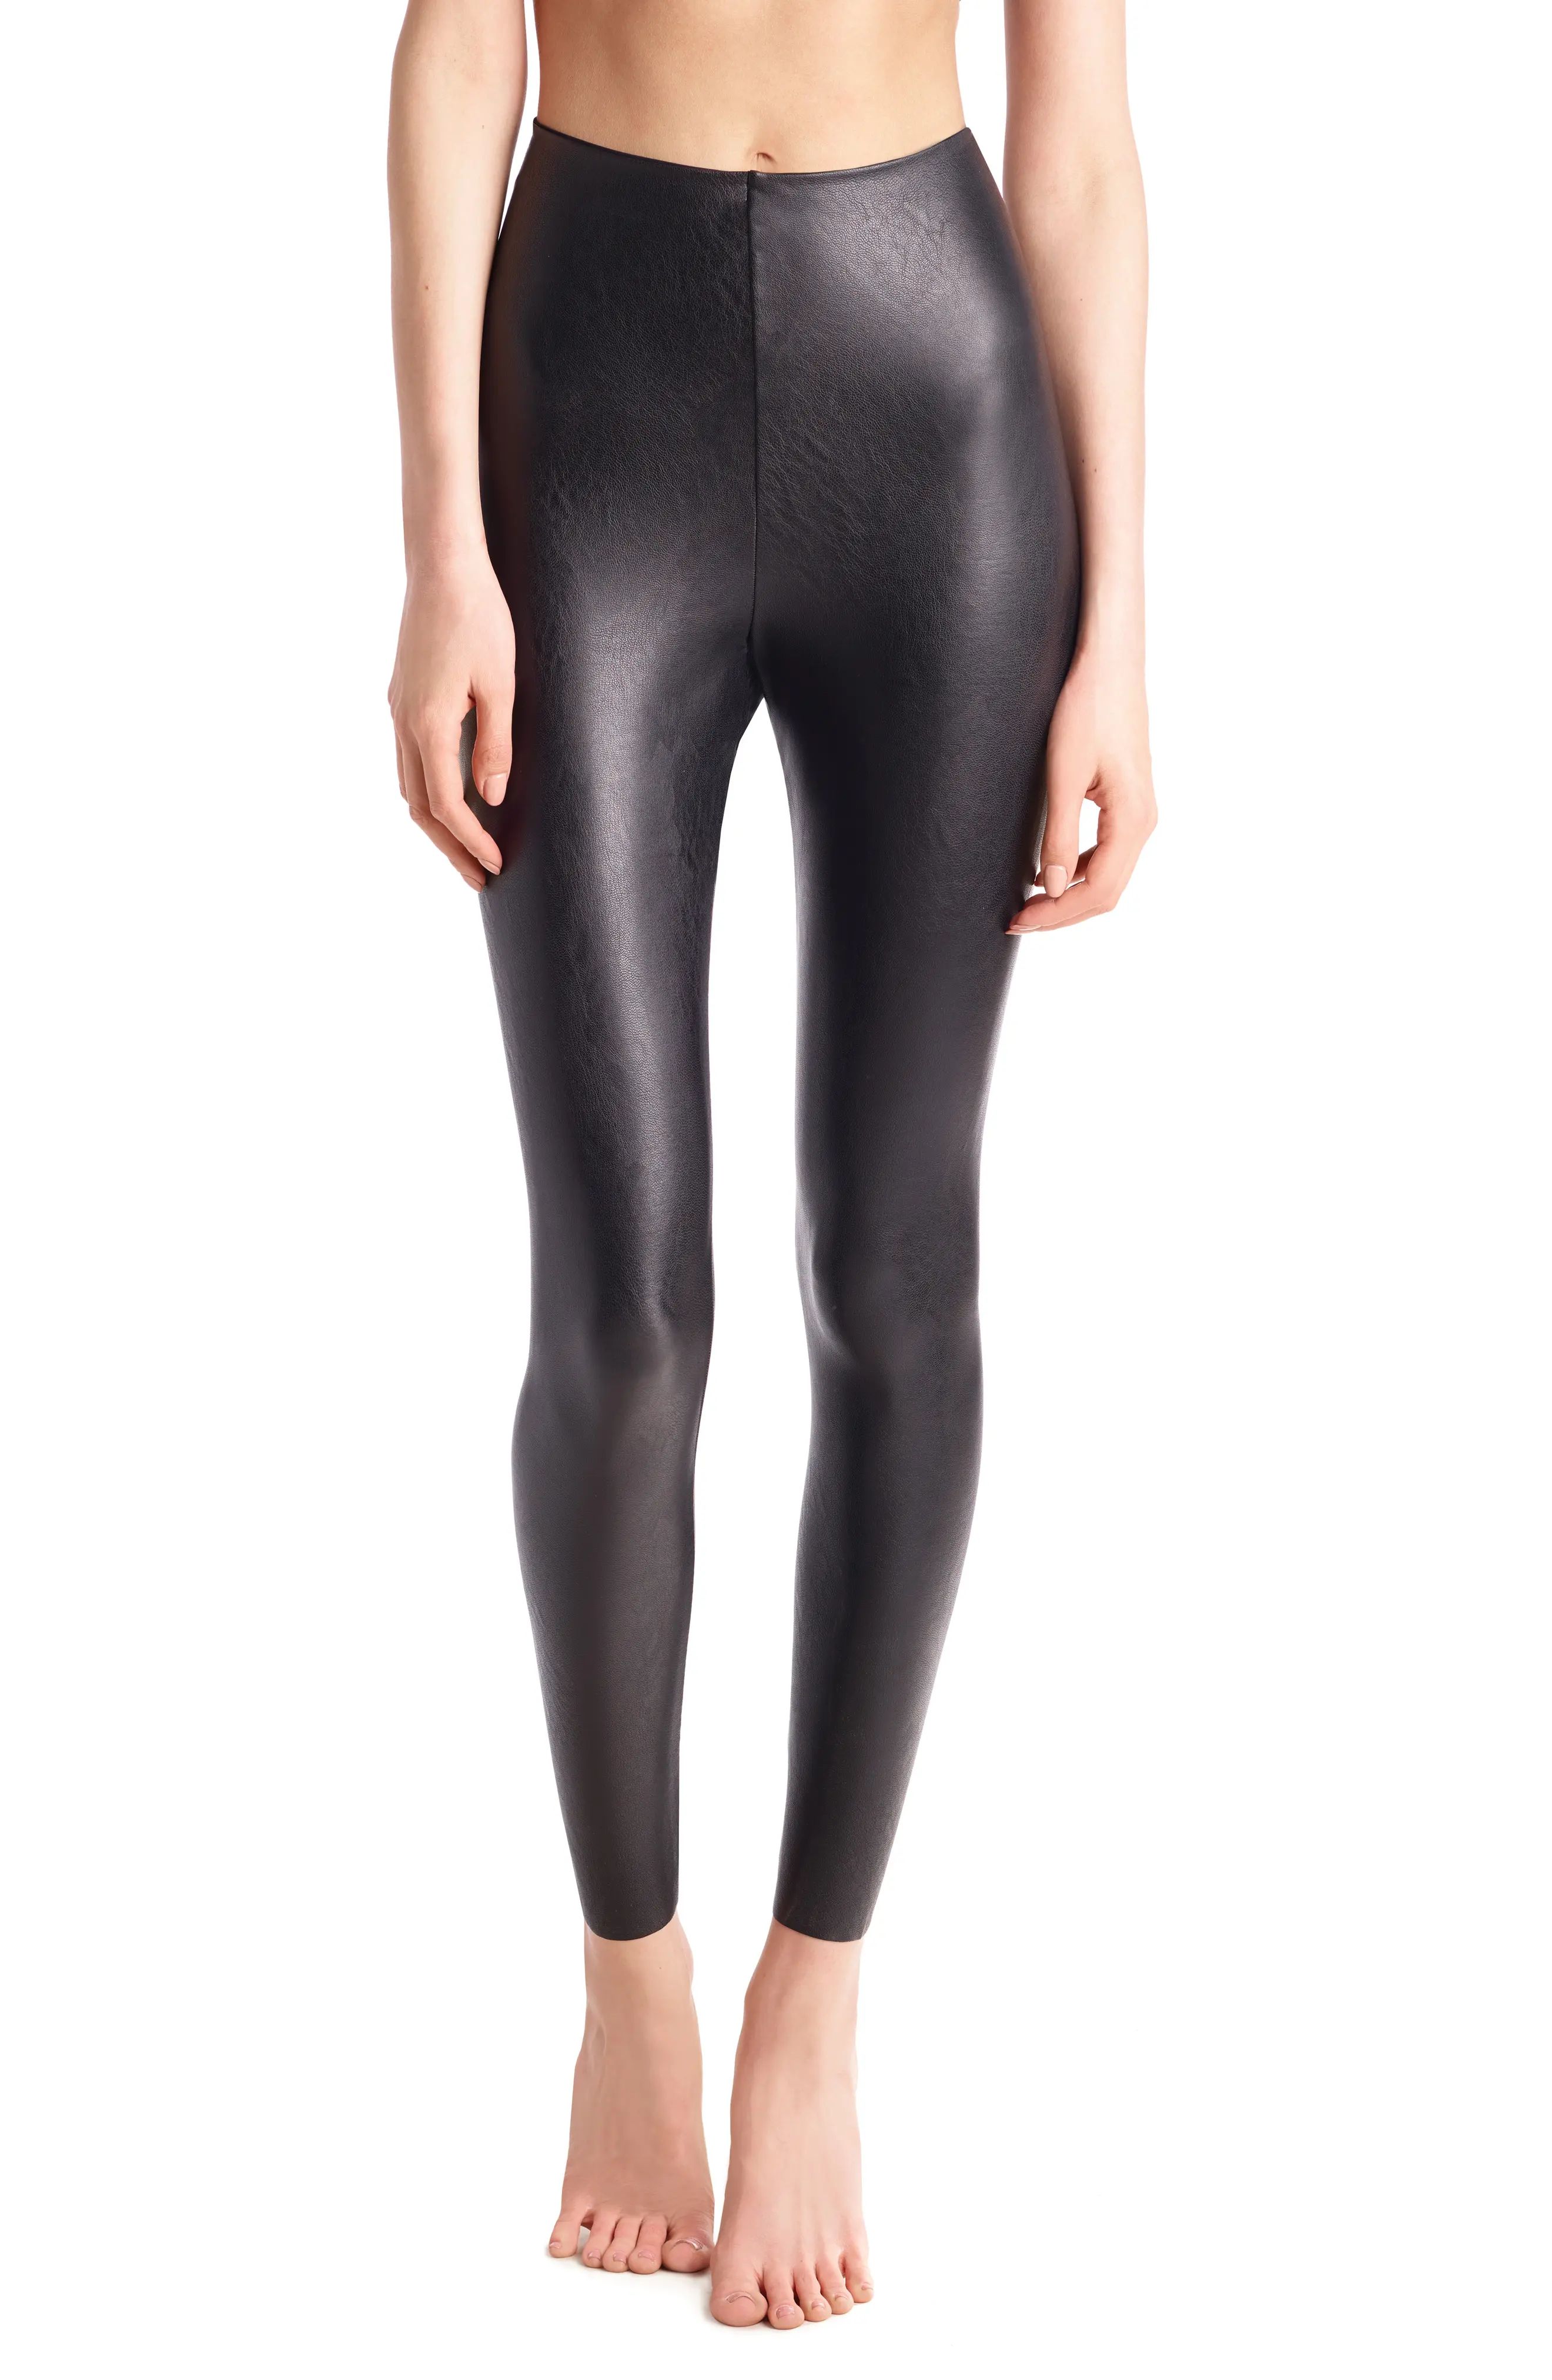 Commando Faux Leather Leggings in Black at Nordstrom, Size Large P | Nordstrom